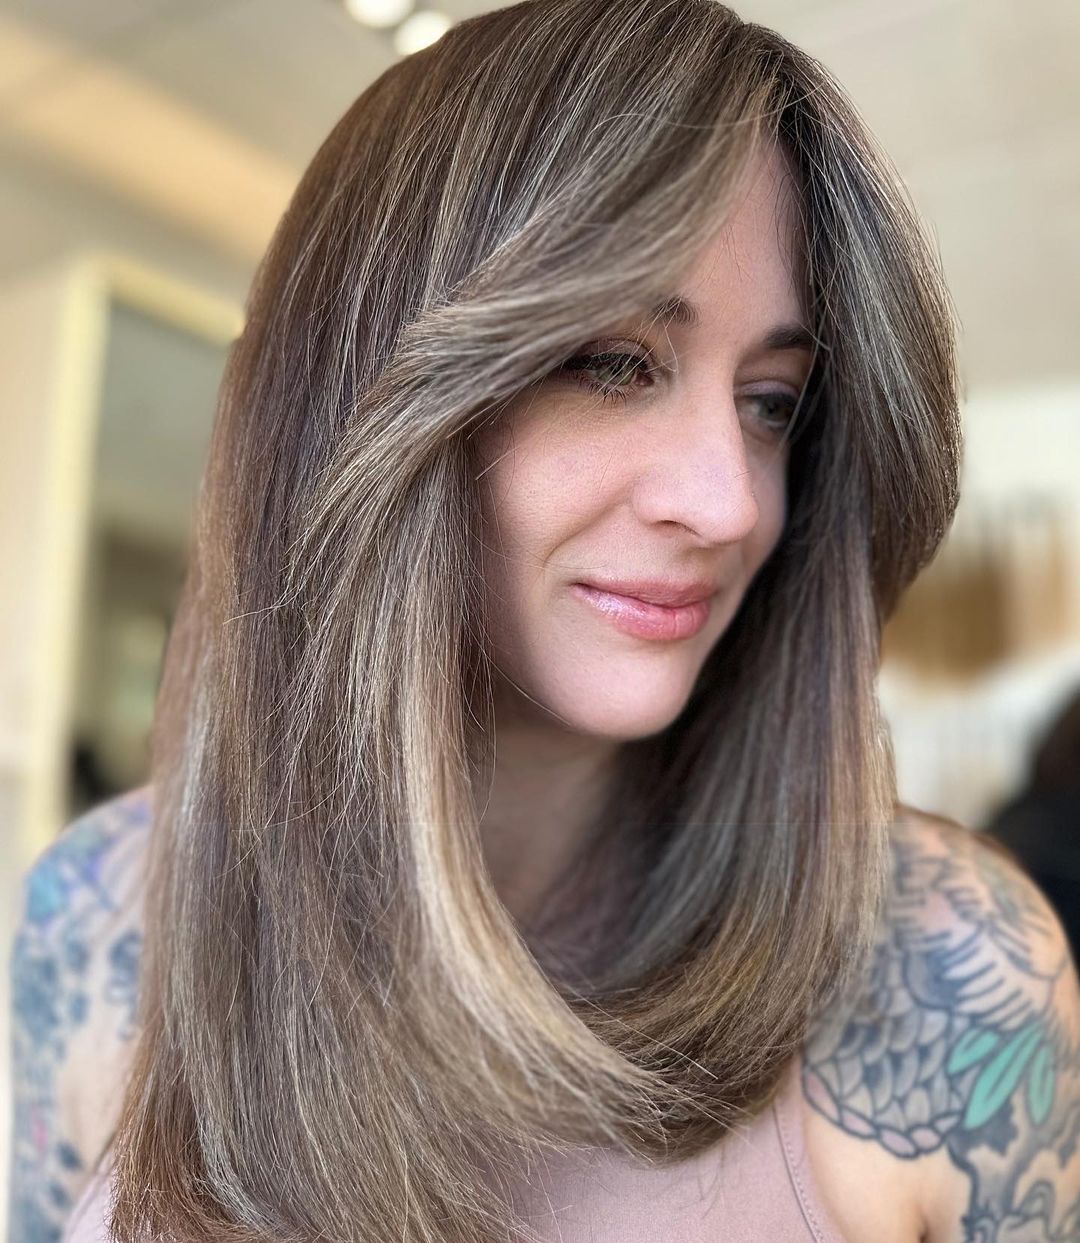 Long Hairstyles for Fine Hair 36 Haircuts for long thin straight hair | Haircuts for thin long hair Indian | Hairstyles for long thin hair over 50 Long Hairstyles for Fine Hair